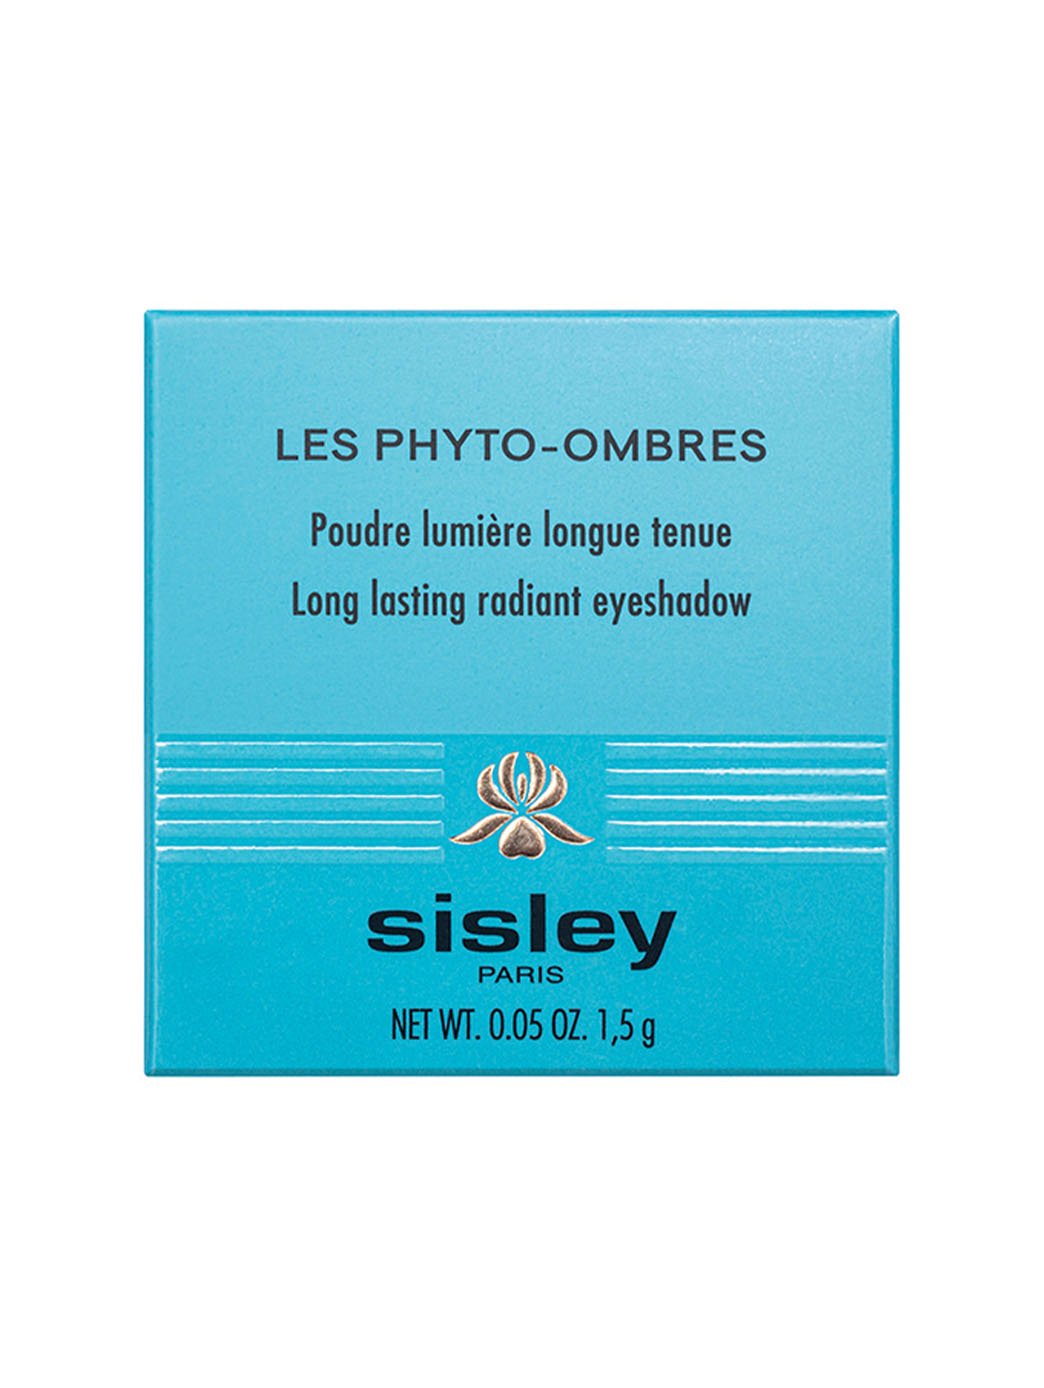 42472956428438 - Les Phyto-Ombres